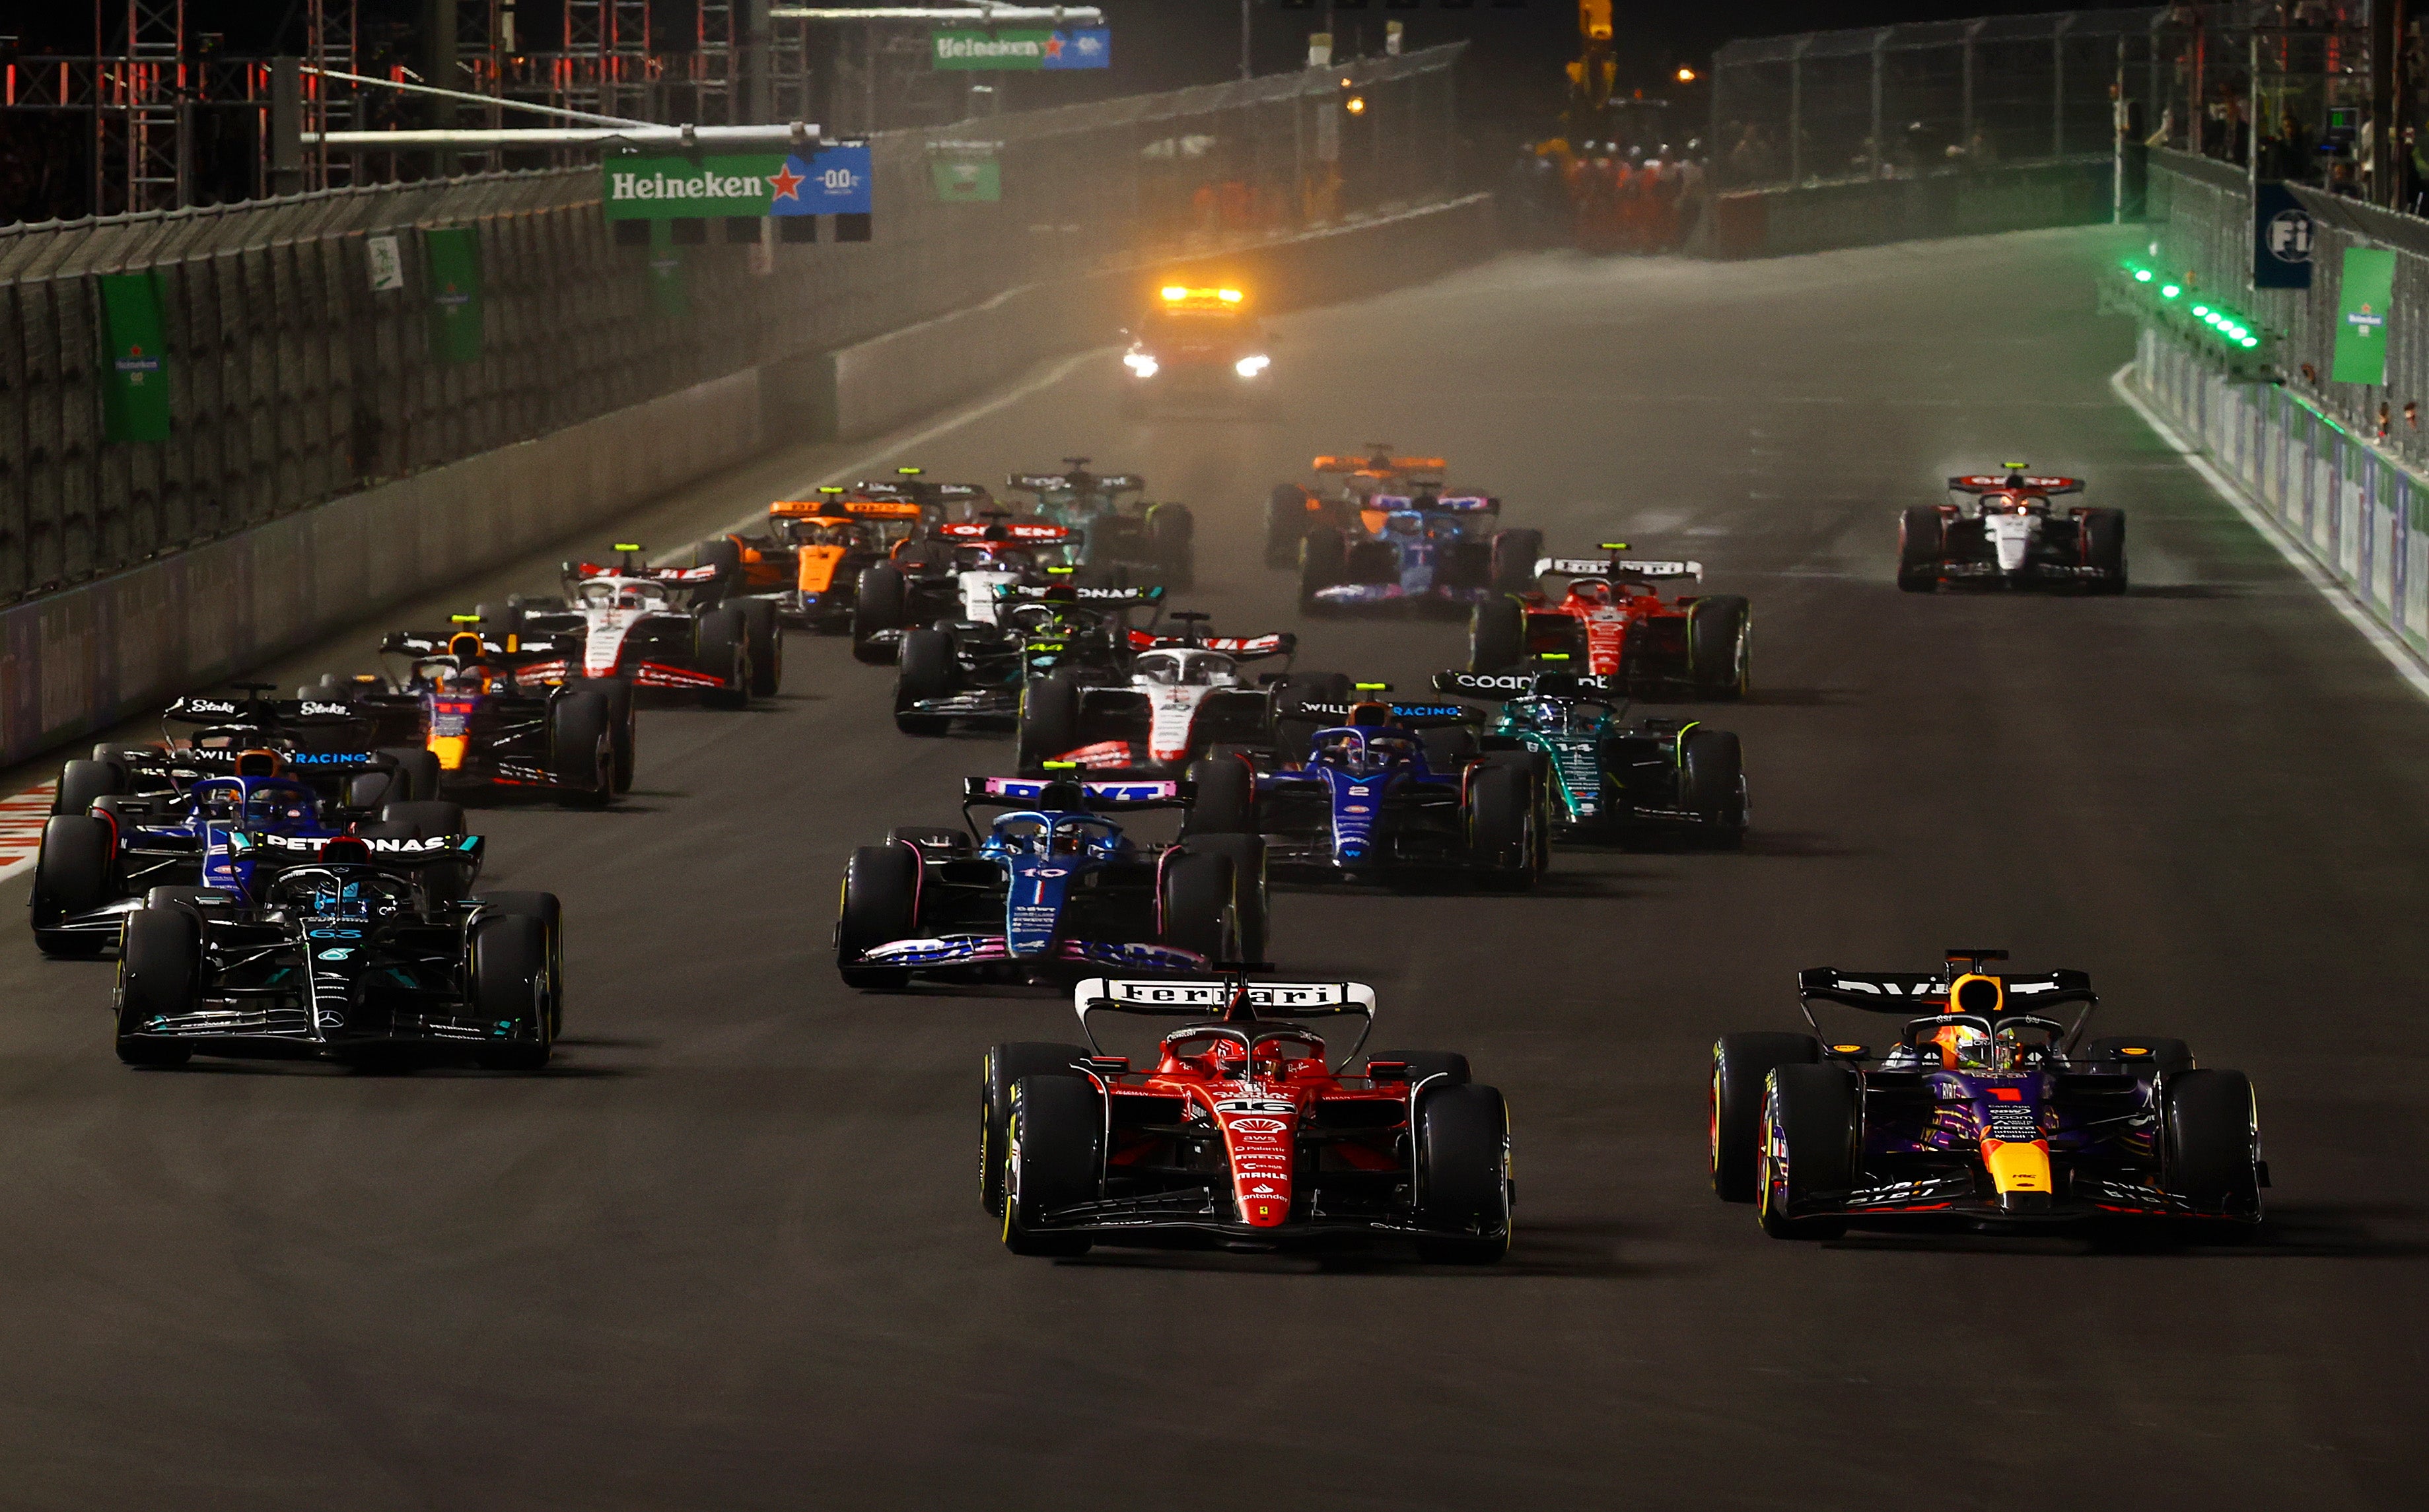 F1 Las Vegas Grand Prix dazzles on debut with usual dose of Max Verstappen  reality